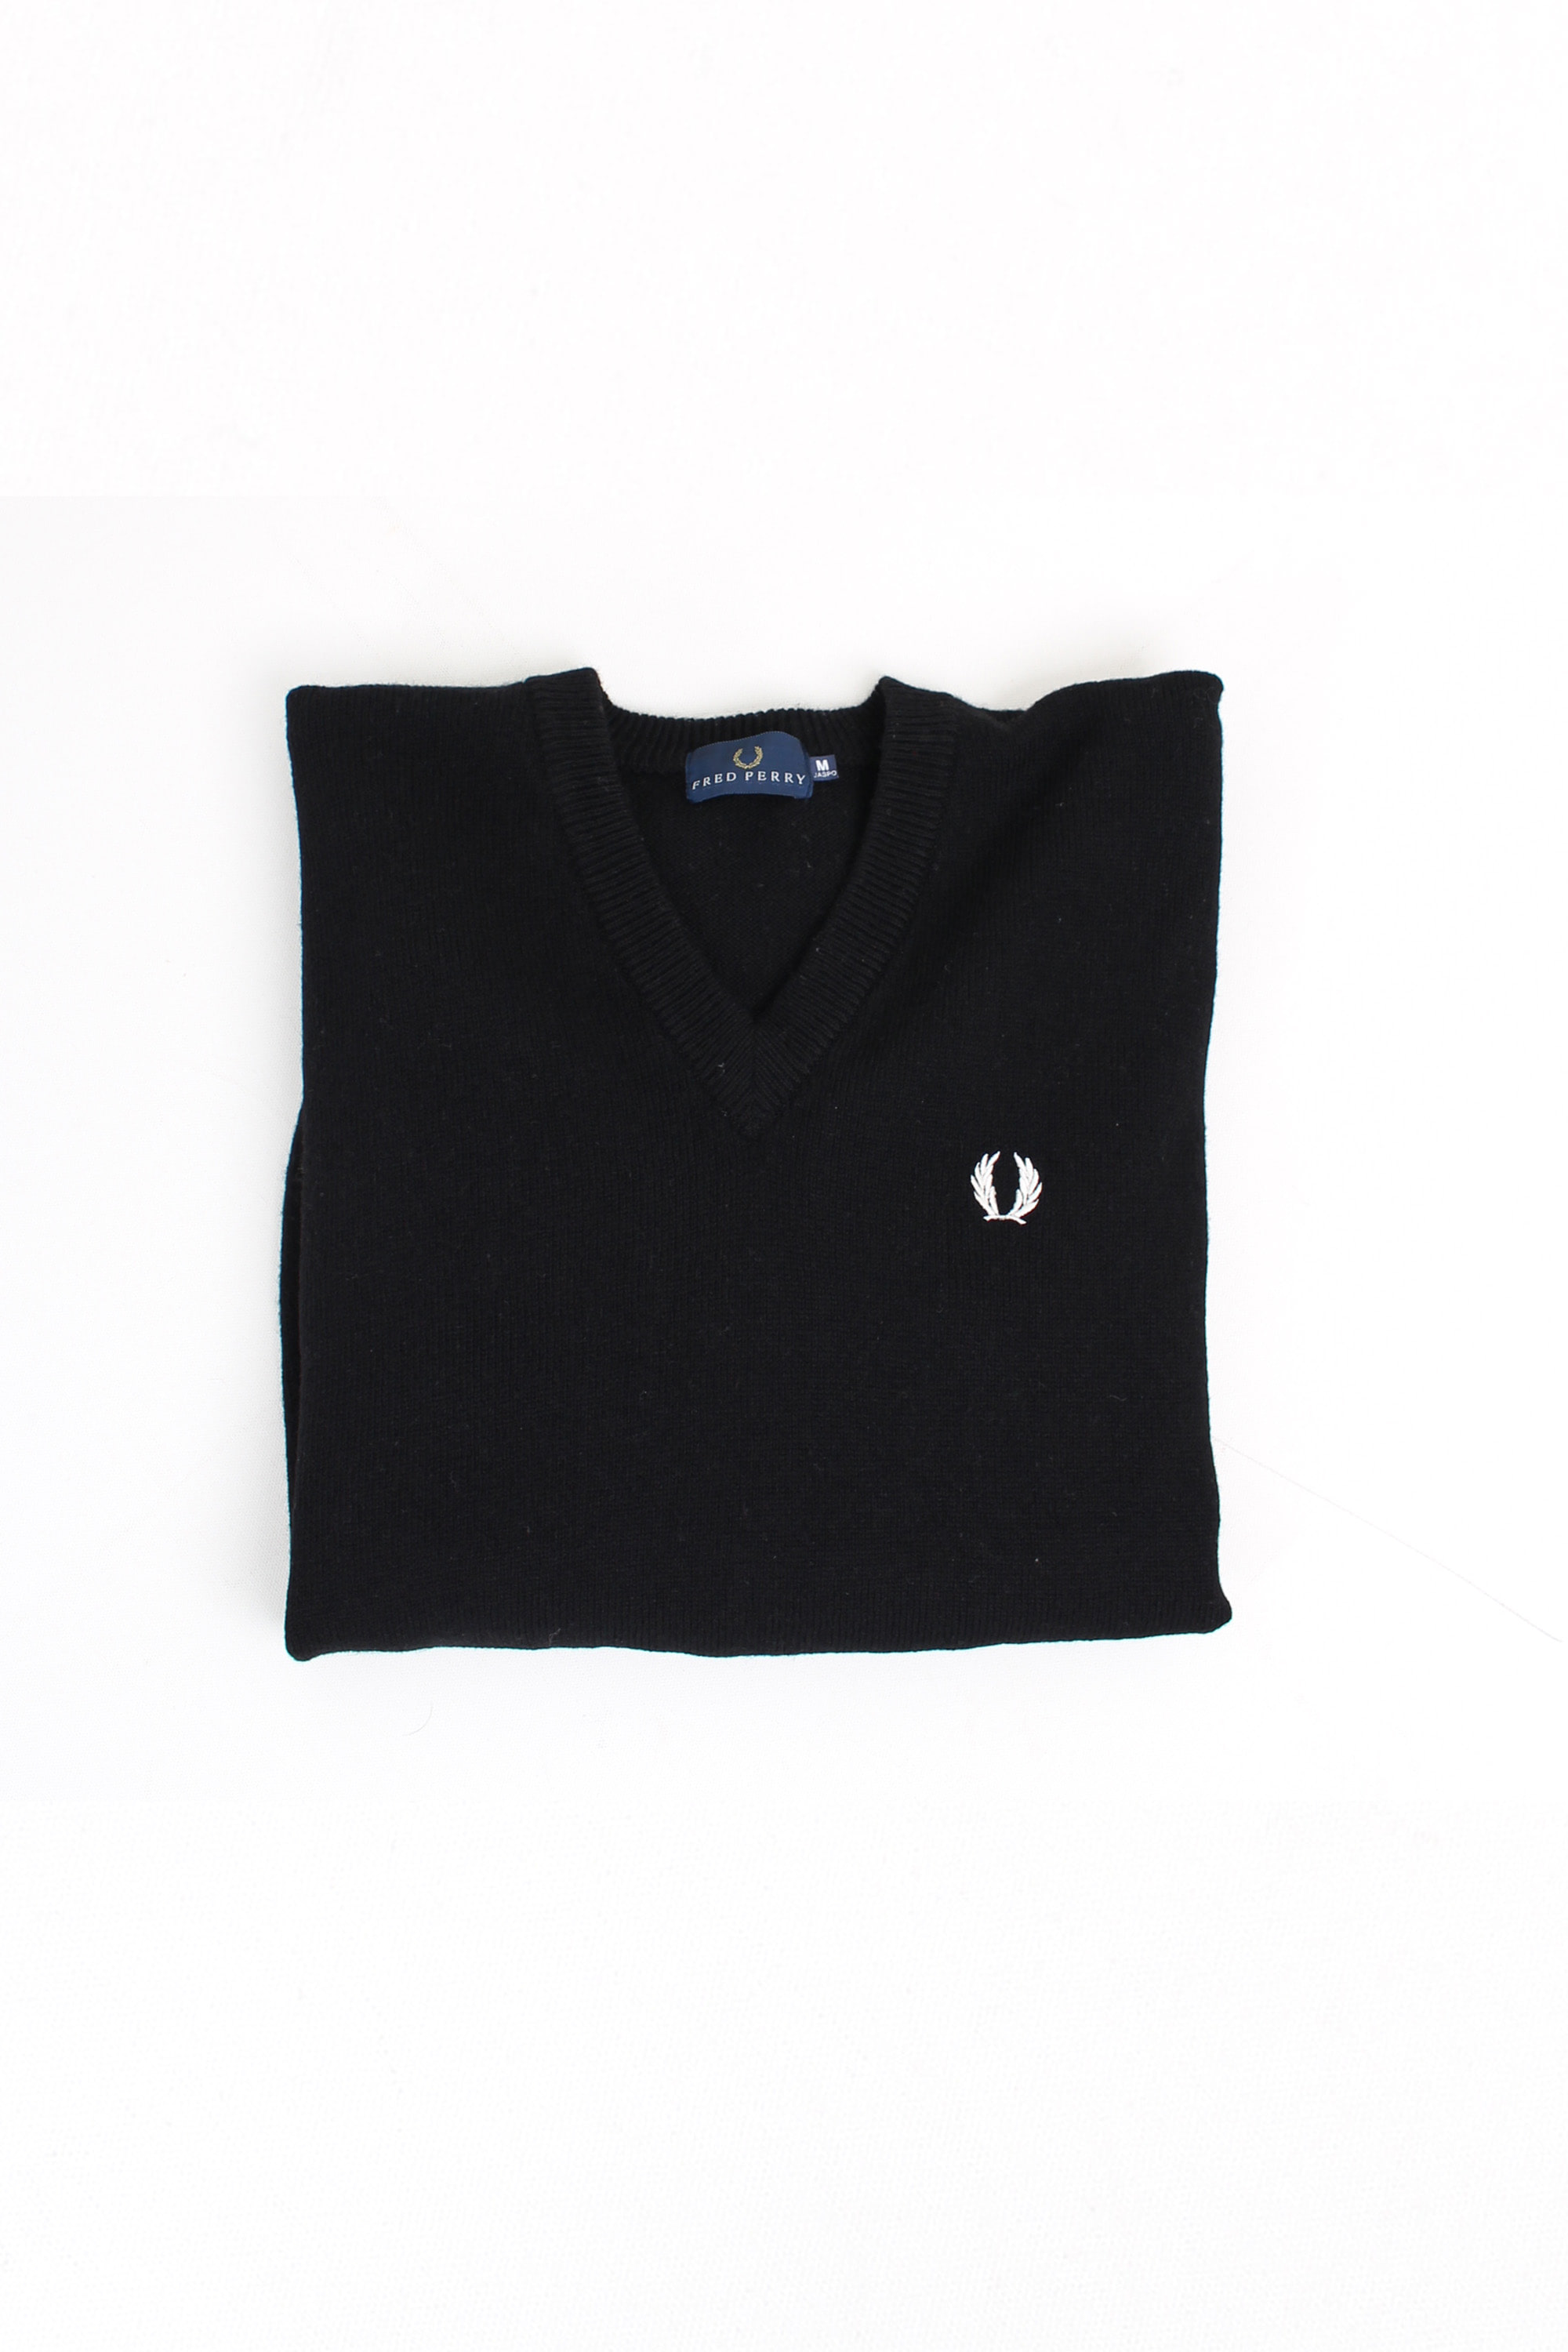 FRED PERRY v neck knit